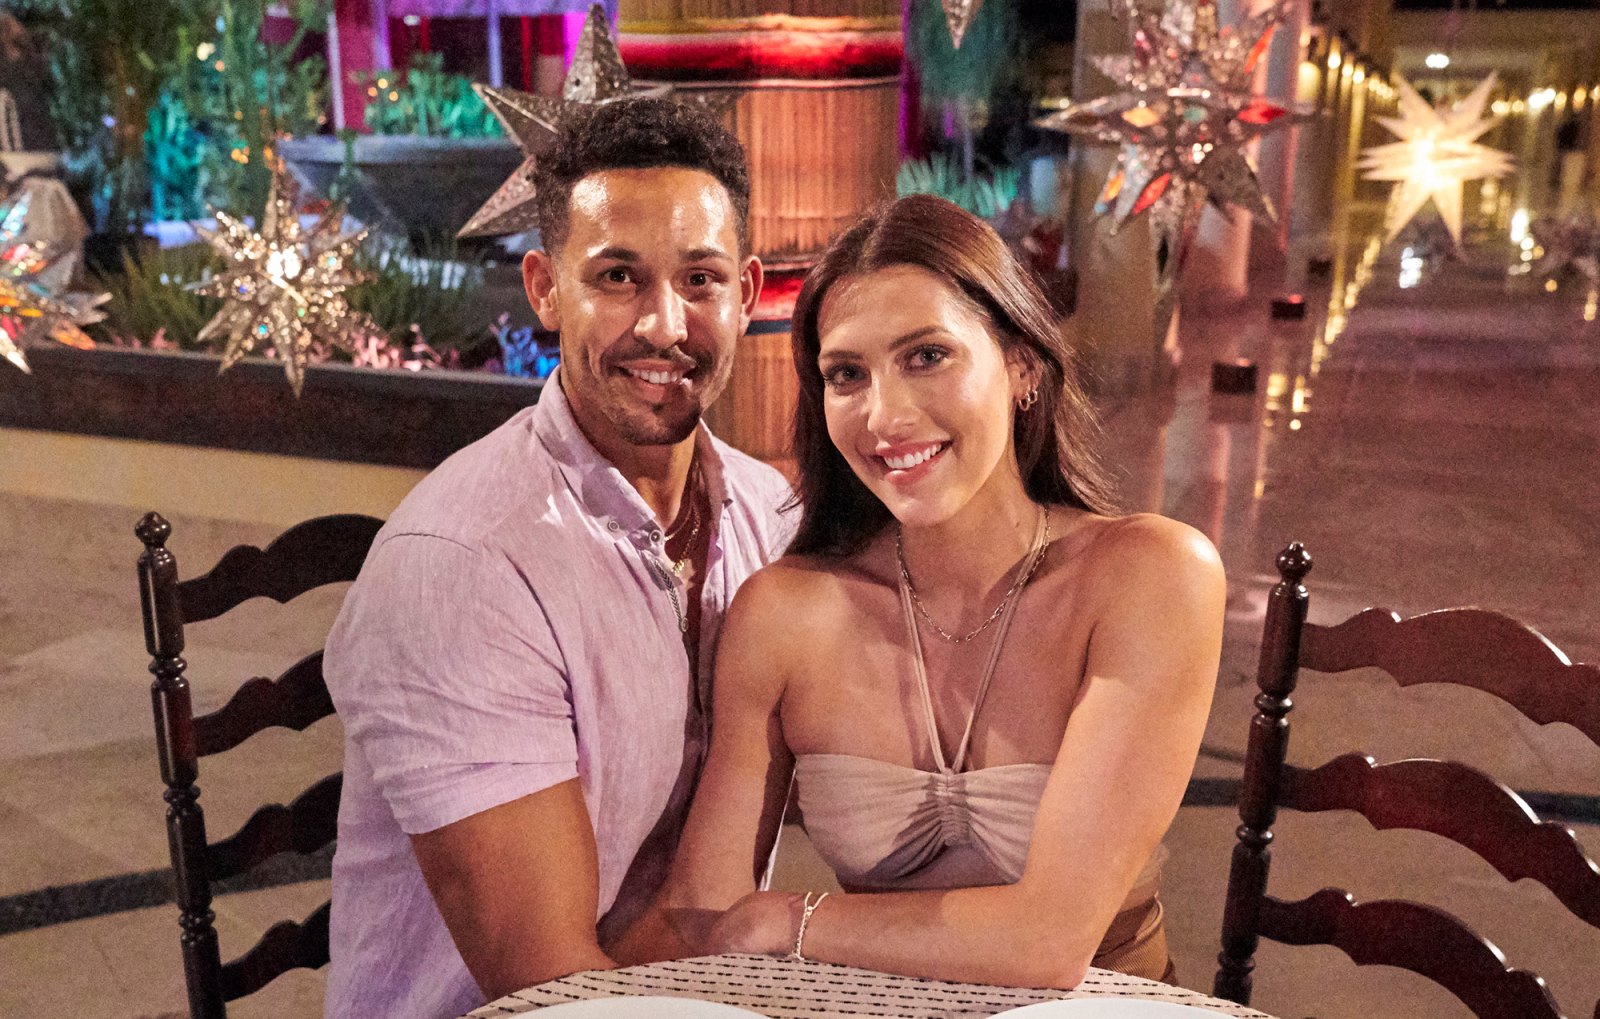 Bachelor Nation Reacts to Becca Kufrin and Thomas Jacobs’ Surprise Engagement: JoJo Fletcher, Ben Higgins and More